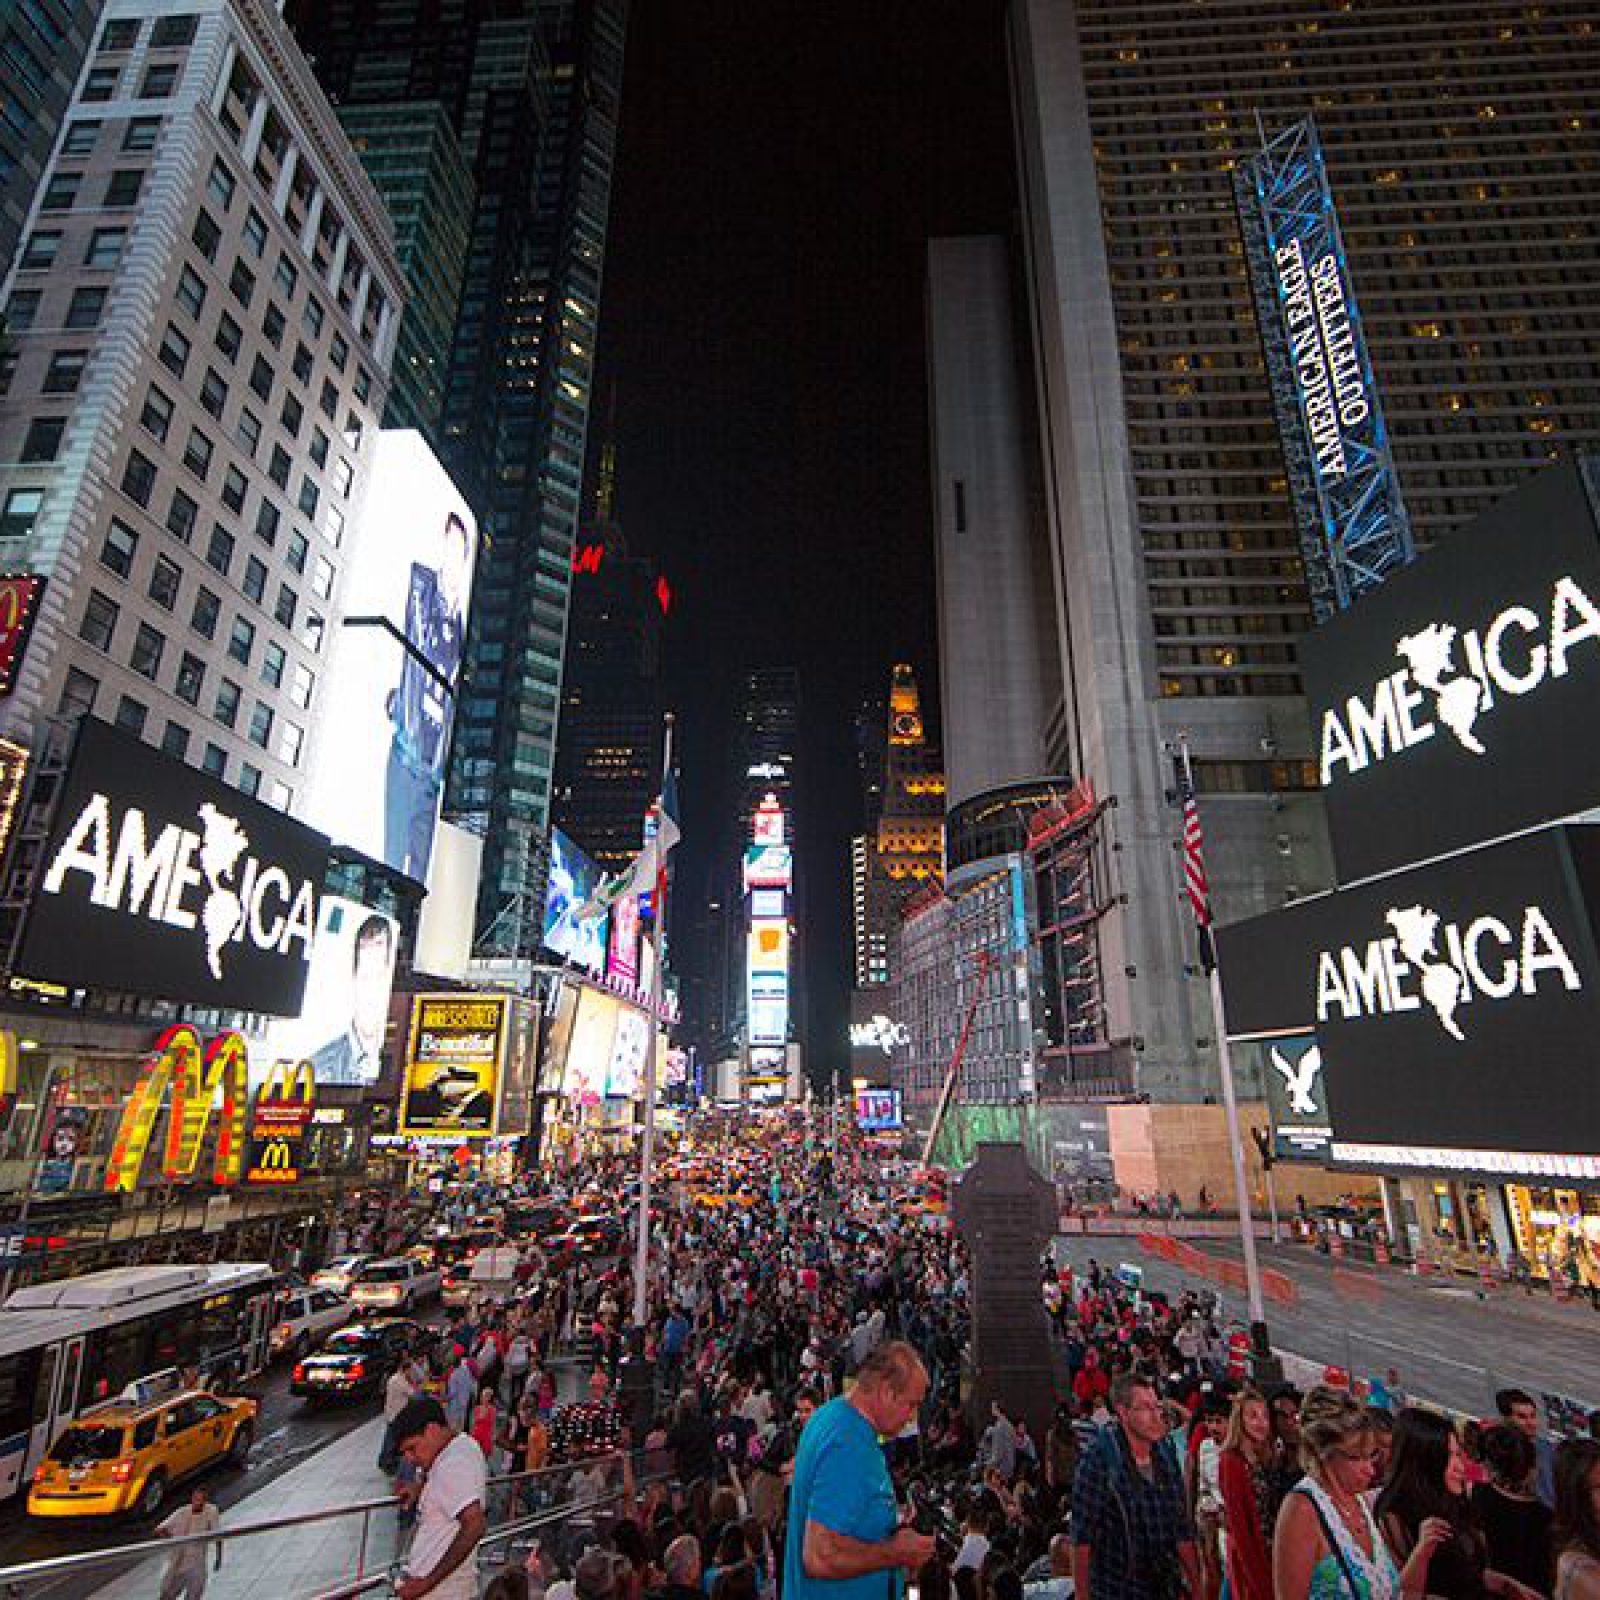 Midnight Moment: Alfredo Jaar, A Logo for America, August 1-31, 2014; 11:57-midnight, every night. Photograph by Ka-Man Tse for @TSqArts. Midnight Moment is a presentation of the Times Square Advertising Coalition (TSAC) and Times Square Arts. This month in in collaboration with the Solomon R. Guggenheim Museum. Midnight Moment: A Digital Gallery is the largest coordinated effort in history by the sign operators in Times Square to display synchronized, cutting-edge creative content at the same time every day.